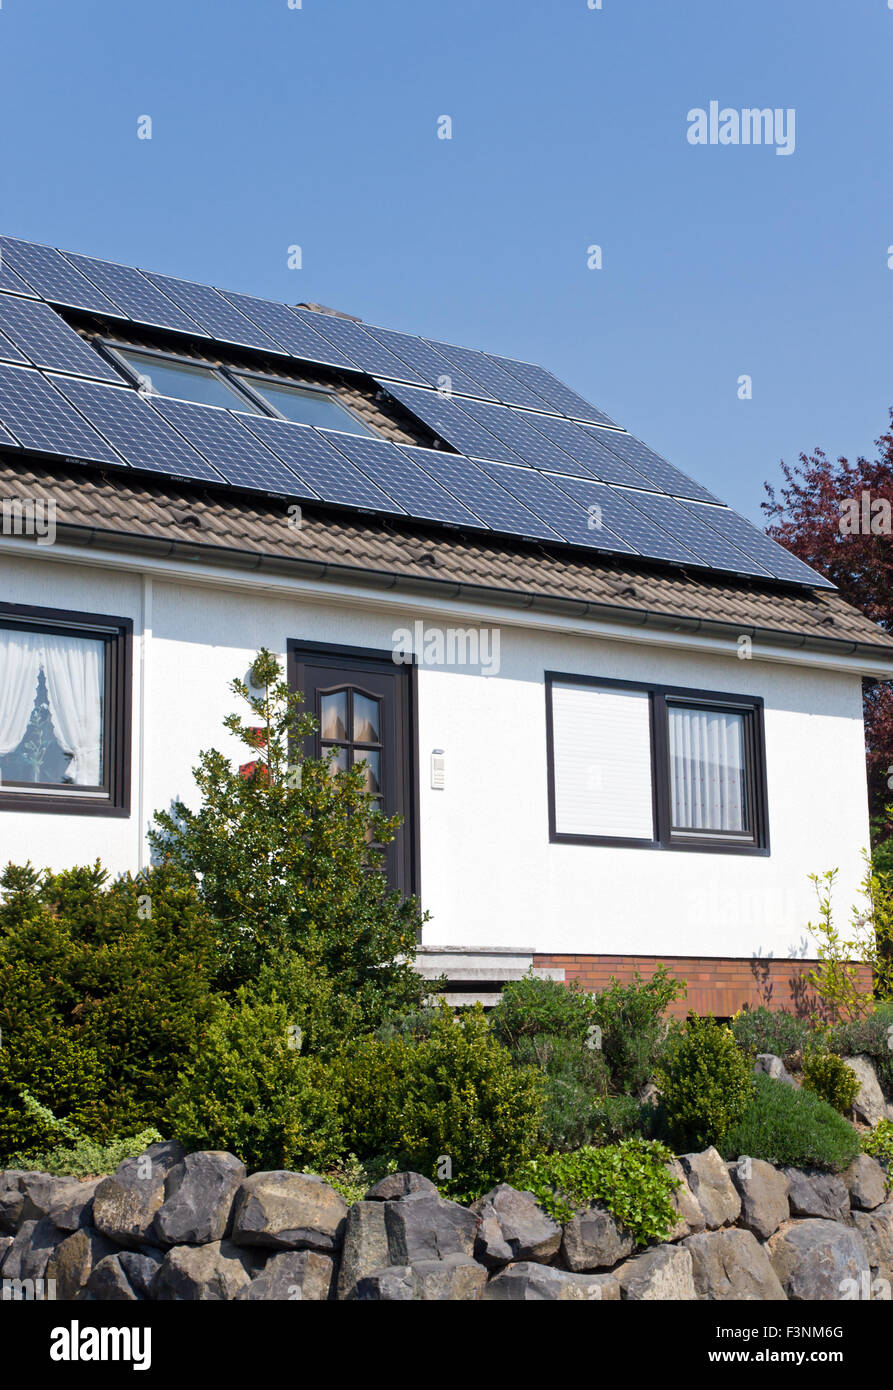 Solar panels on the roof of a single occupancy house Stock Photo